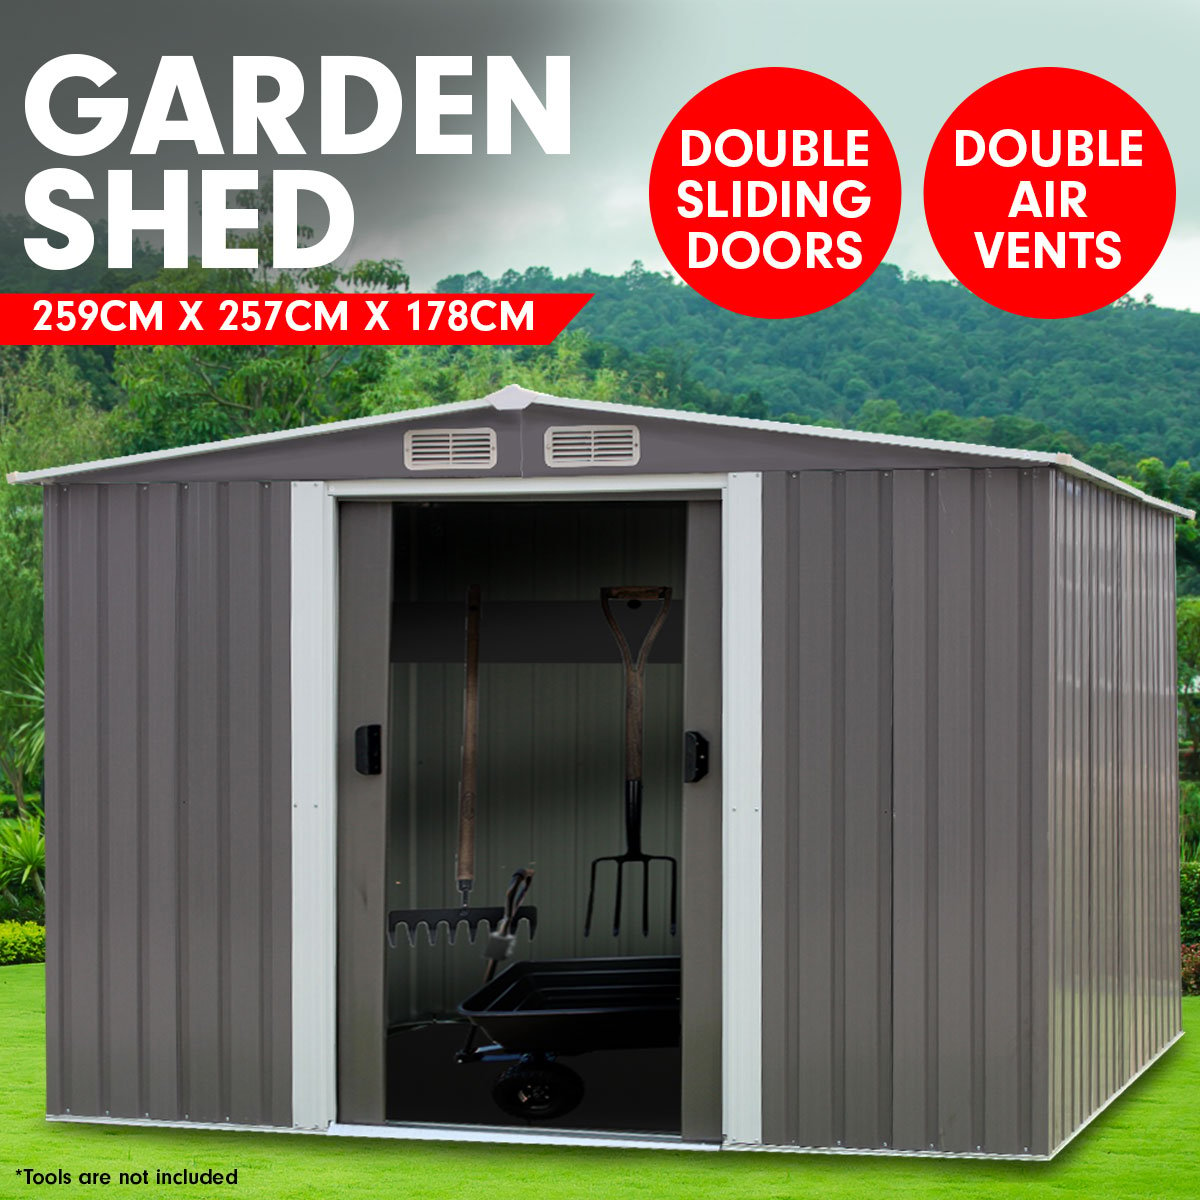 Garden Shed Spire Roof 8ft x 8ft Outdoor Storage Shelter - Grey 1